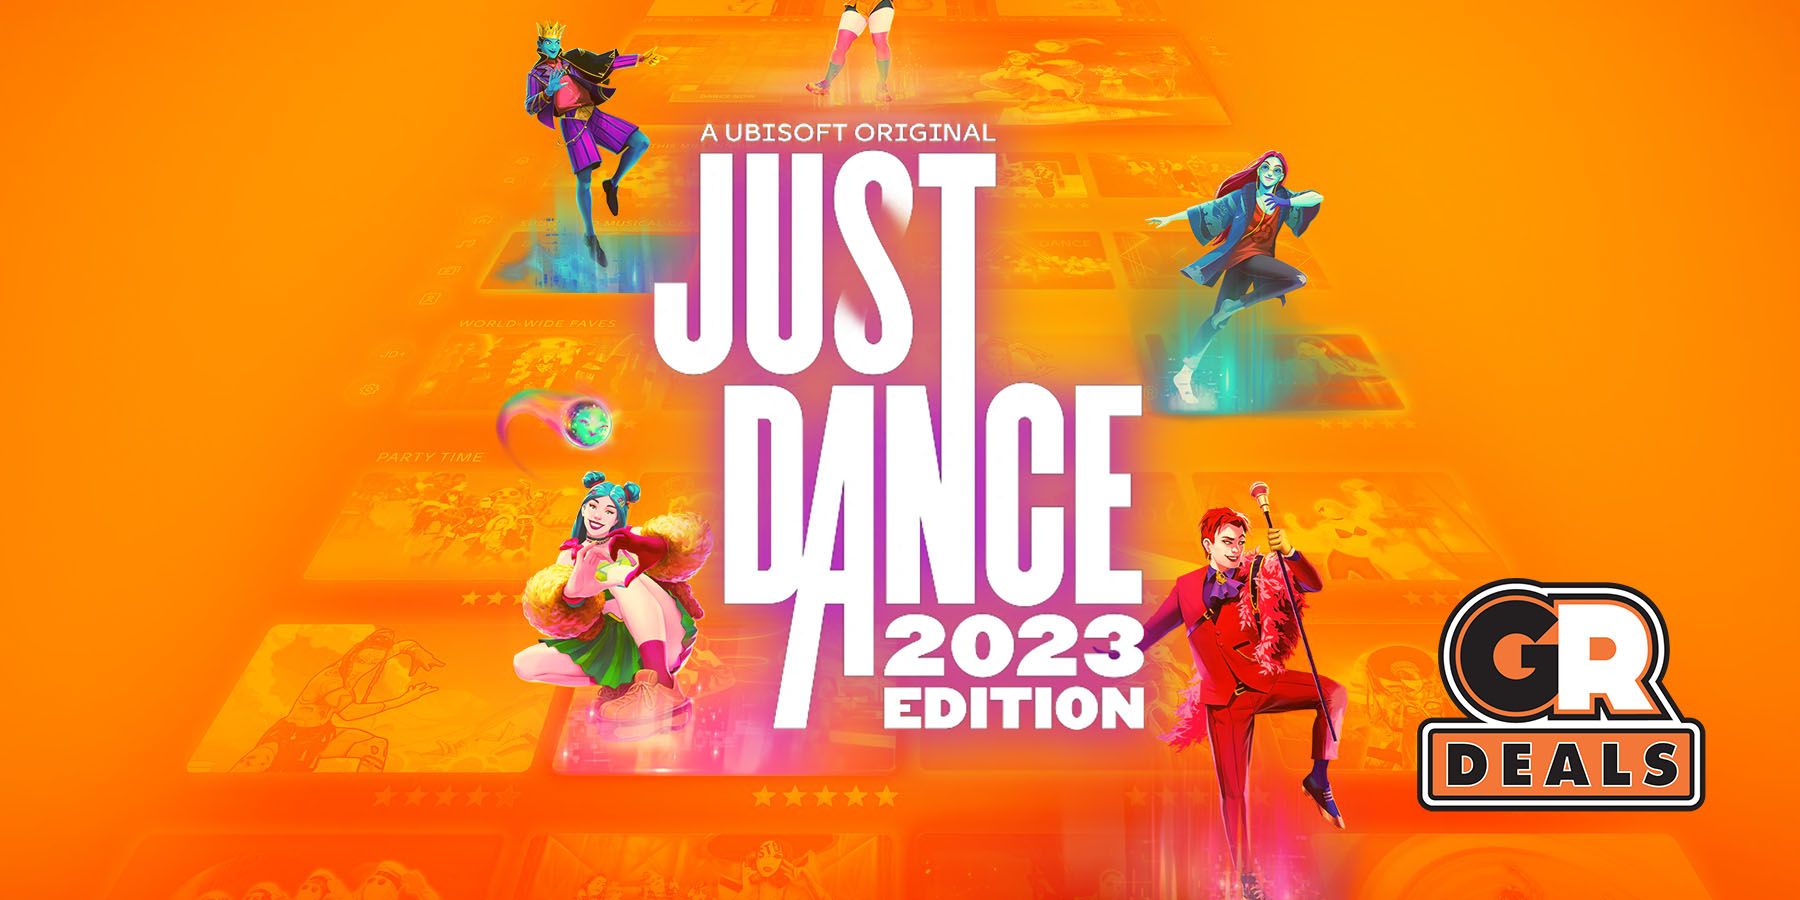 Just Dance 2017, PlayStation 4 PS4 Dancing Game New